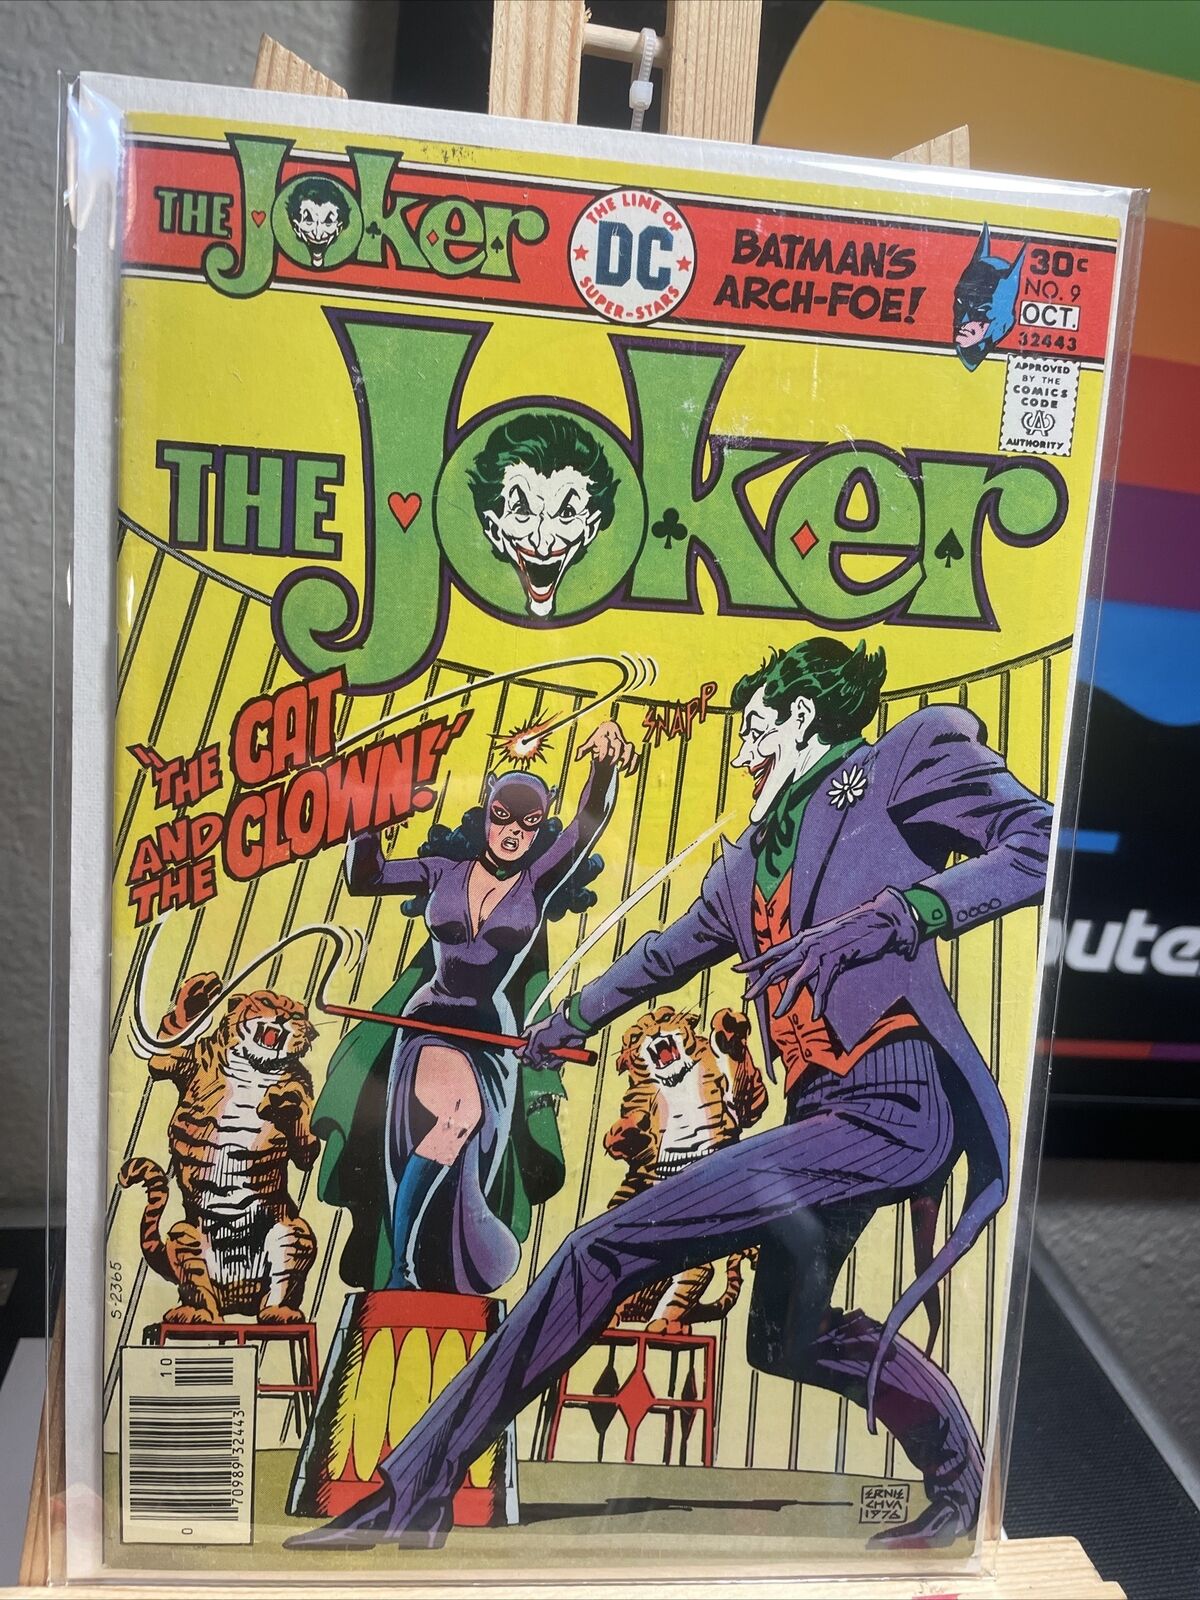 1976 The Joker #9 Catwoman Cover Two Face Appearance Last Issue